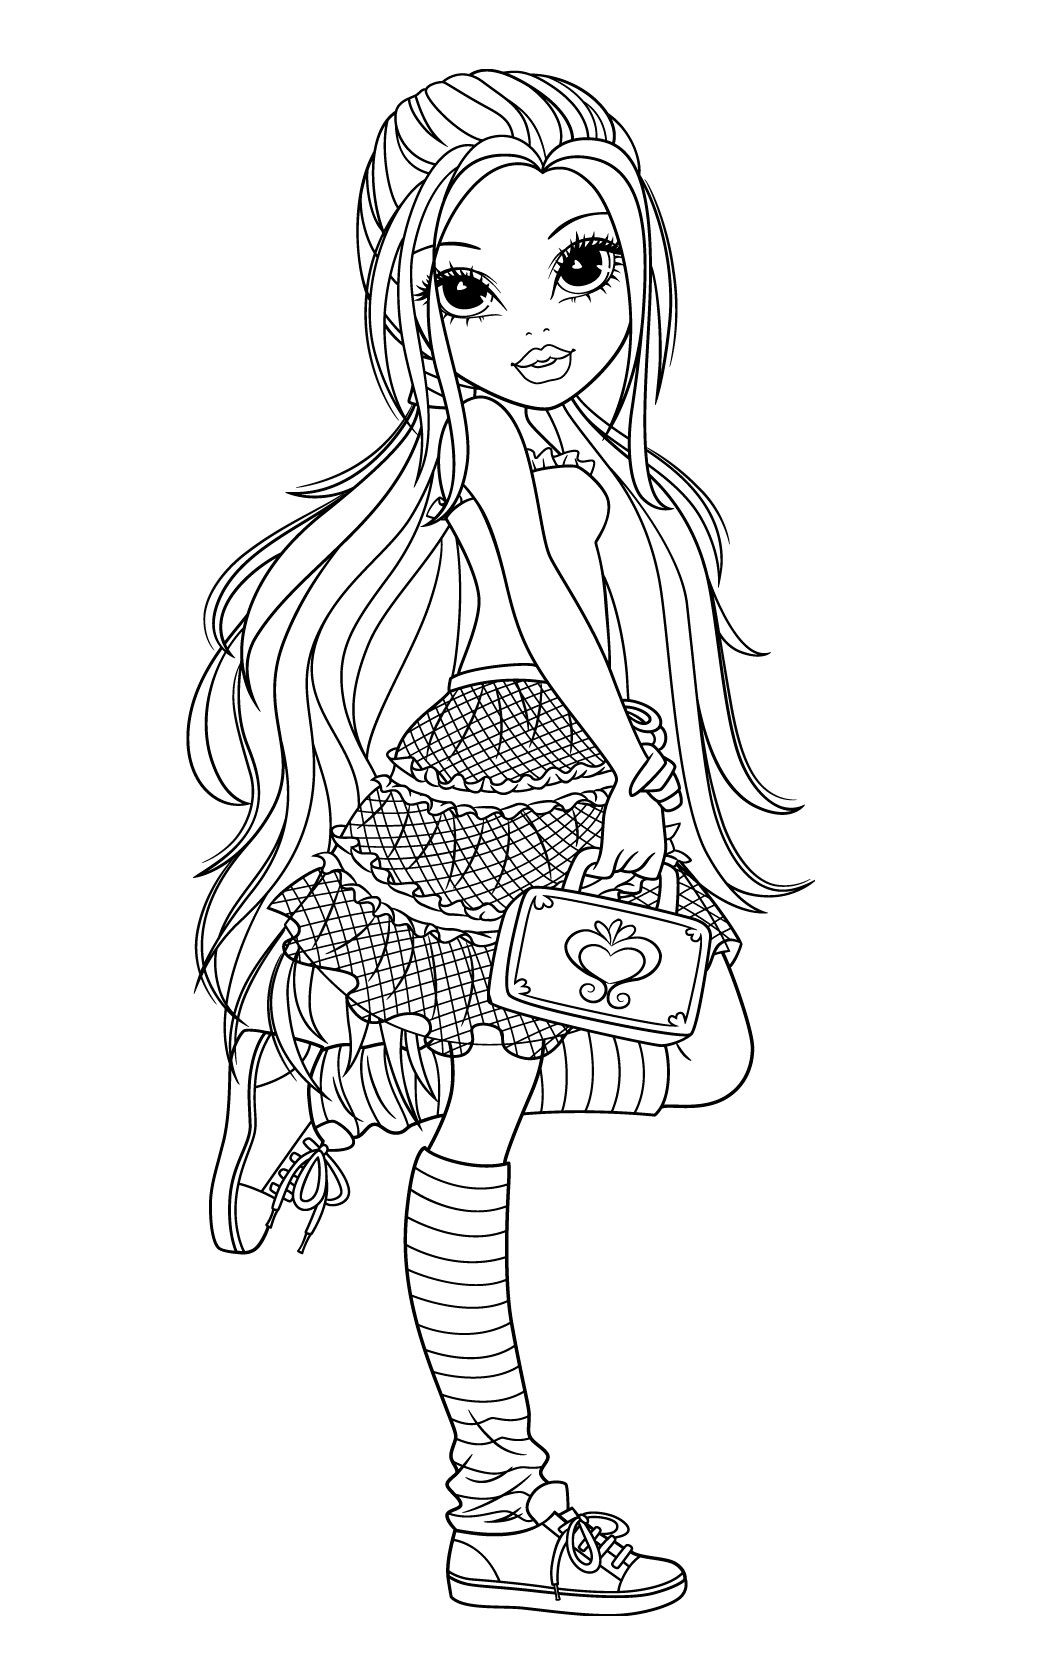 Coloring Pages Of Girls
 New Moxie Girlz Coloring Pages will be added frequently so